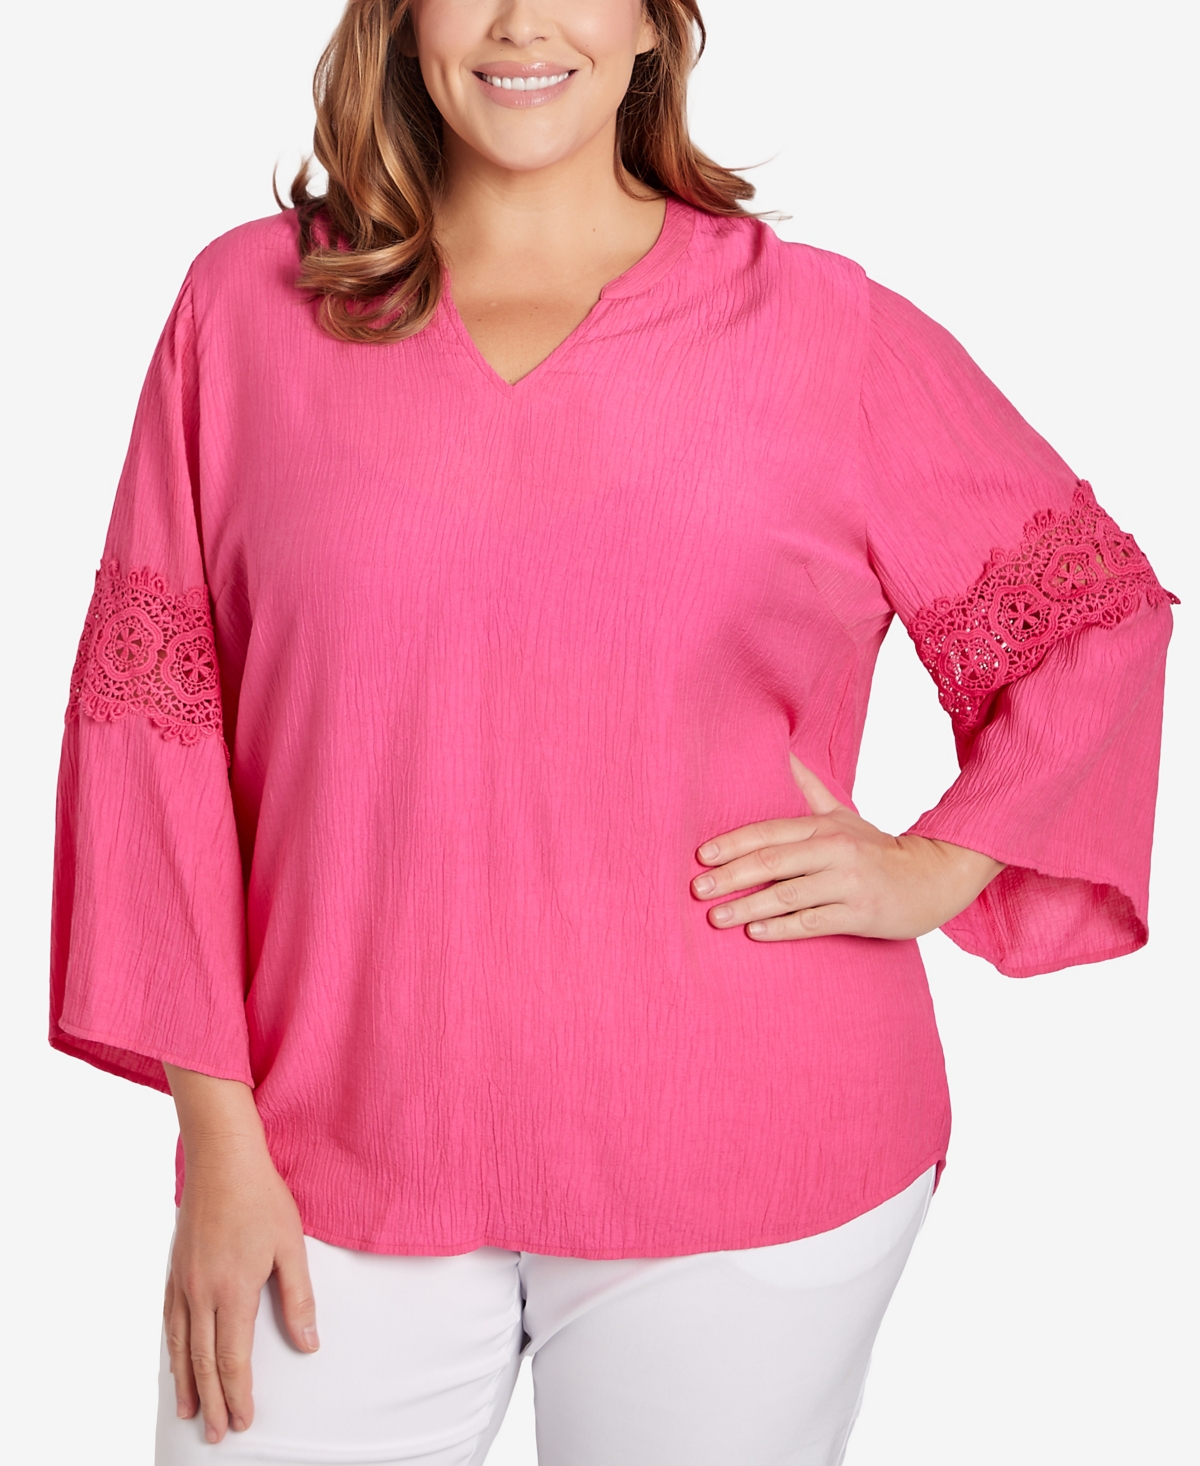 Plus Size Lace-Embellished Top - Raspberry